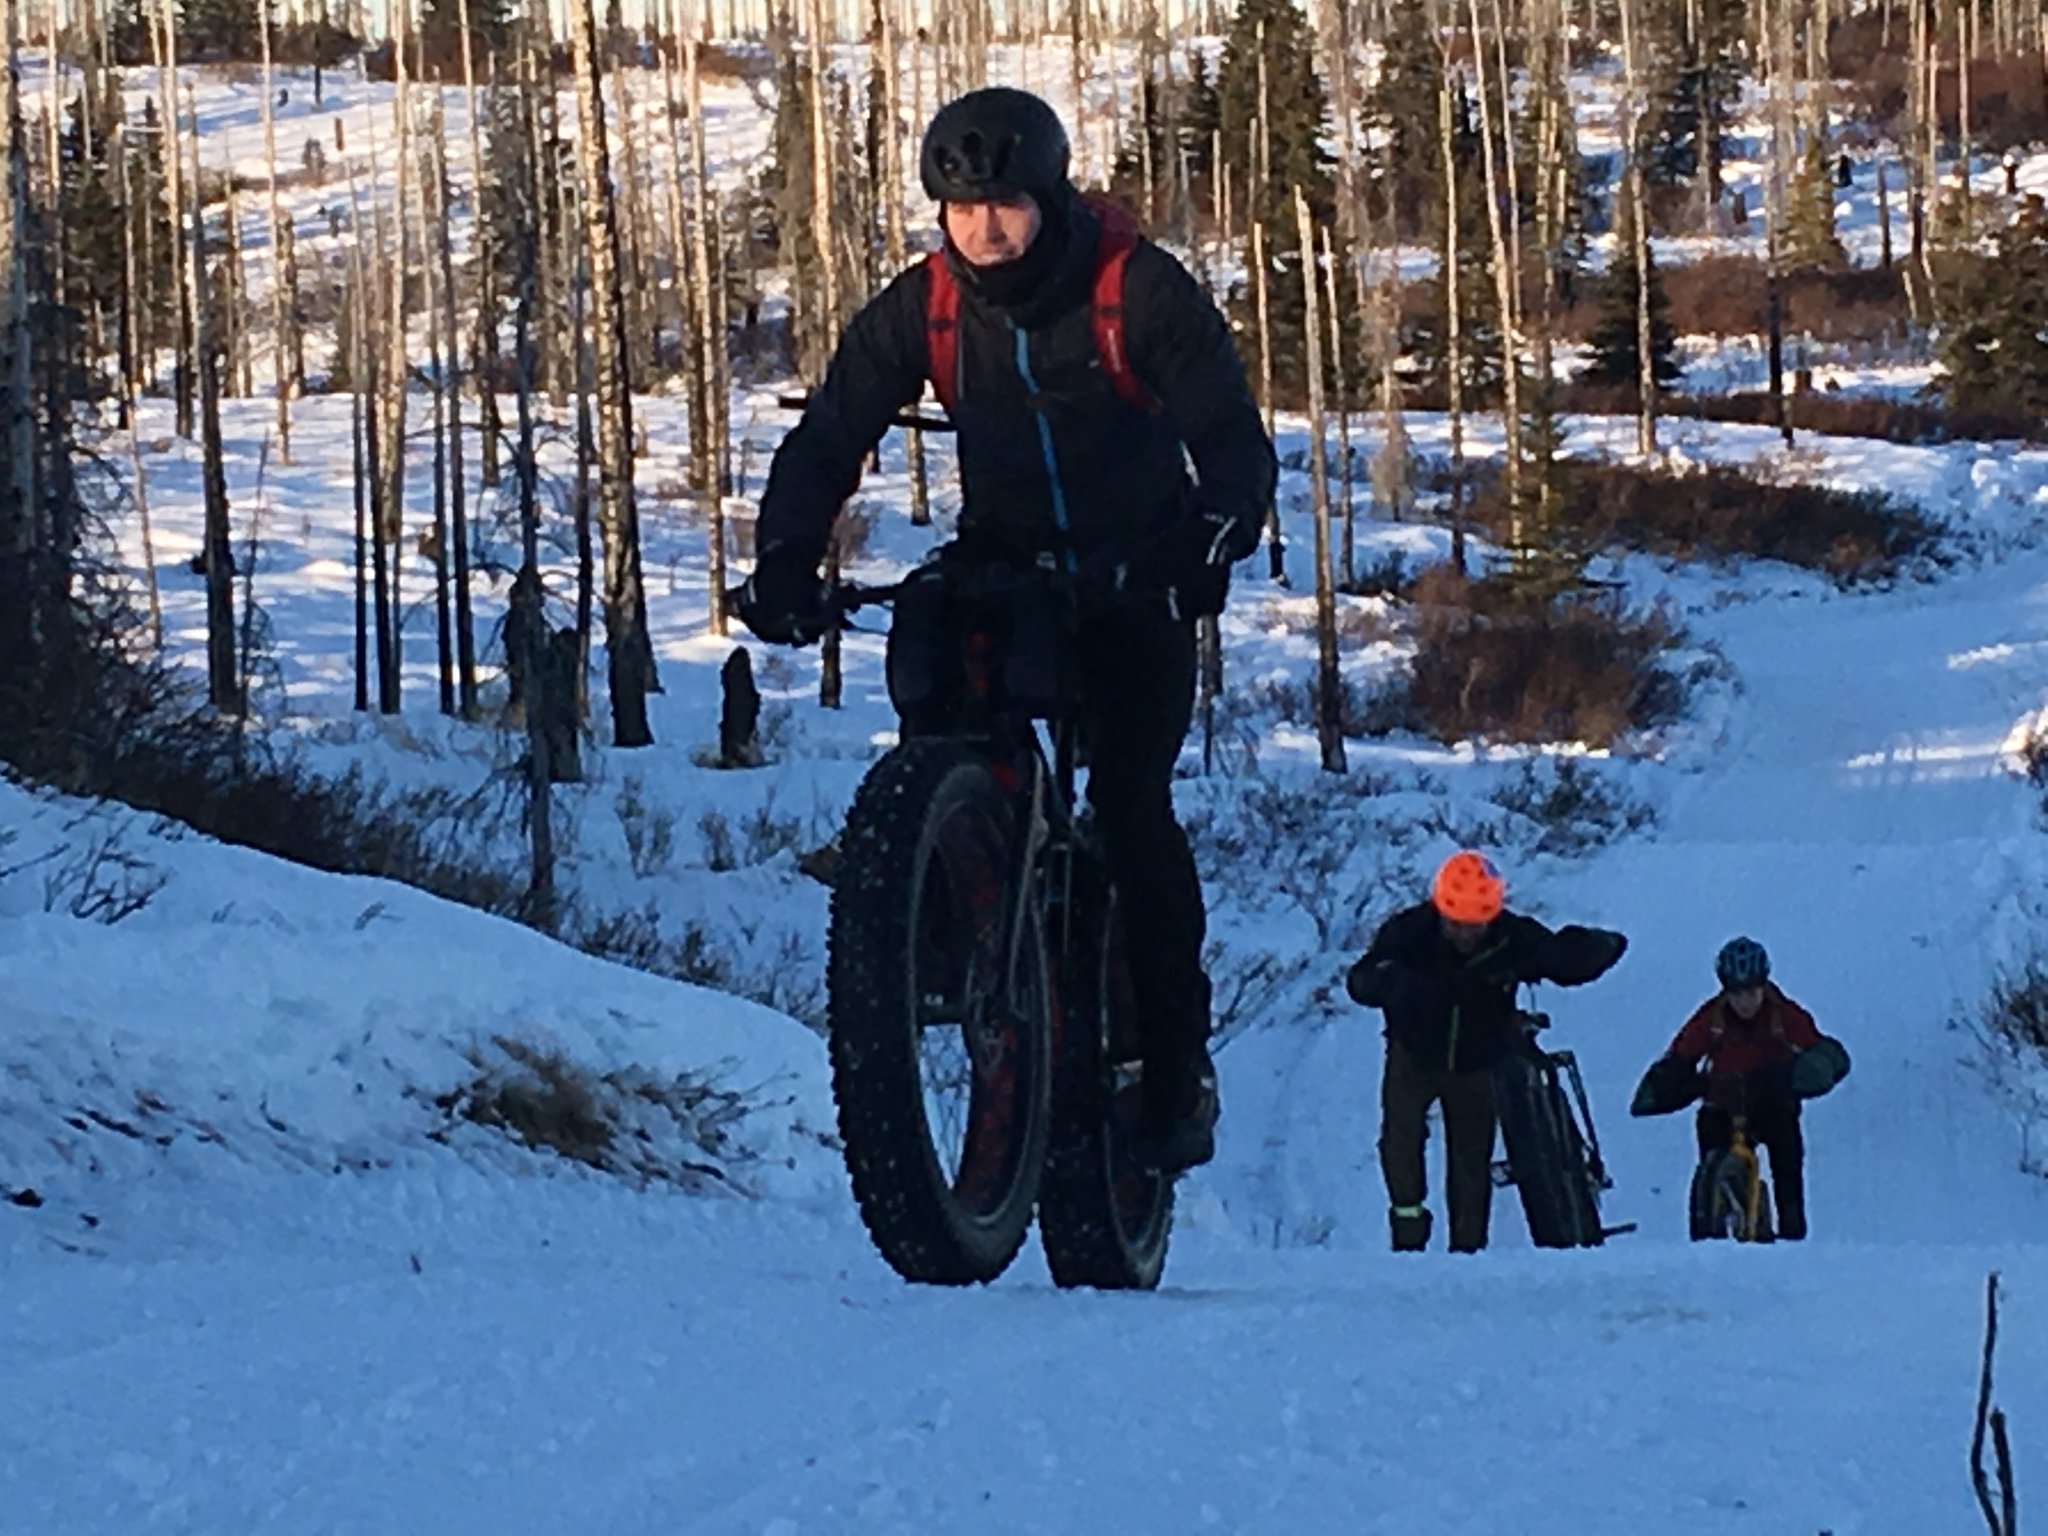 Mike Crawford of Kenai leads a group of fat tire bikers up a climb in the Caribou Hills in January. A fat tire race and ride is planned for Sunday starting at Freddie’s Road House on Oil Well Road near Ninilchik. (Clarion file photo)